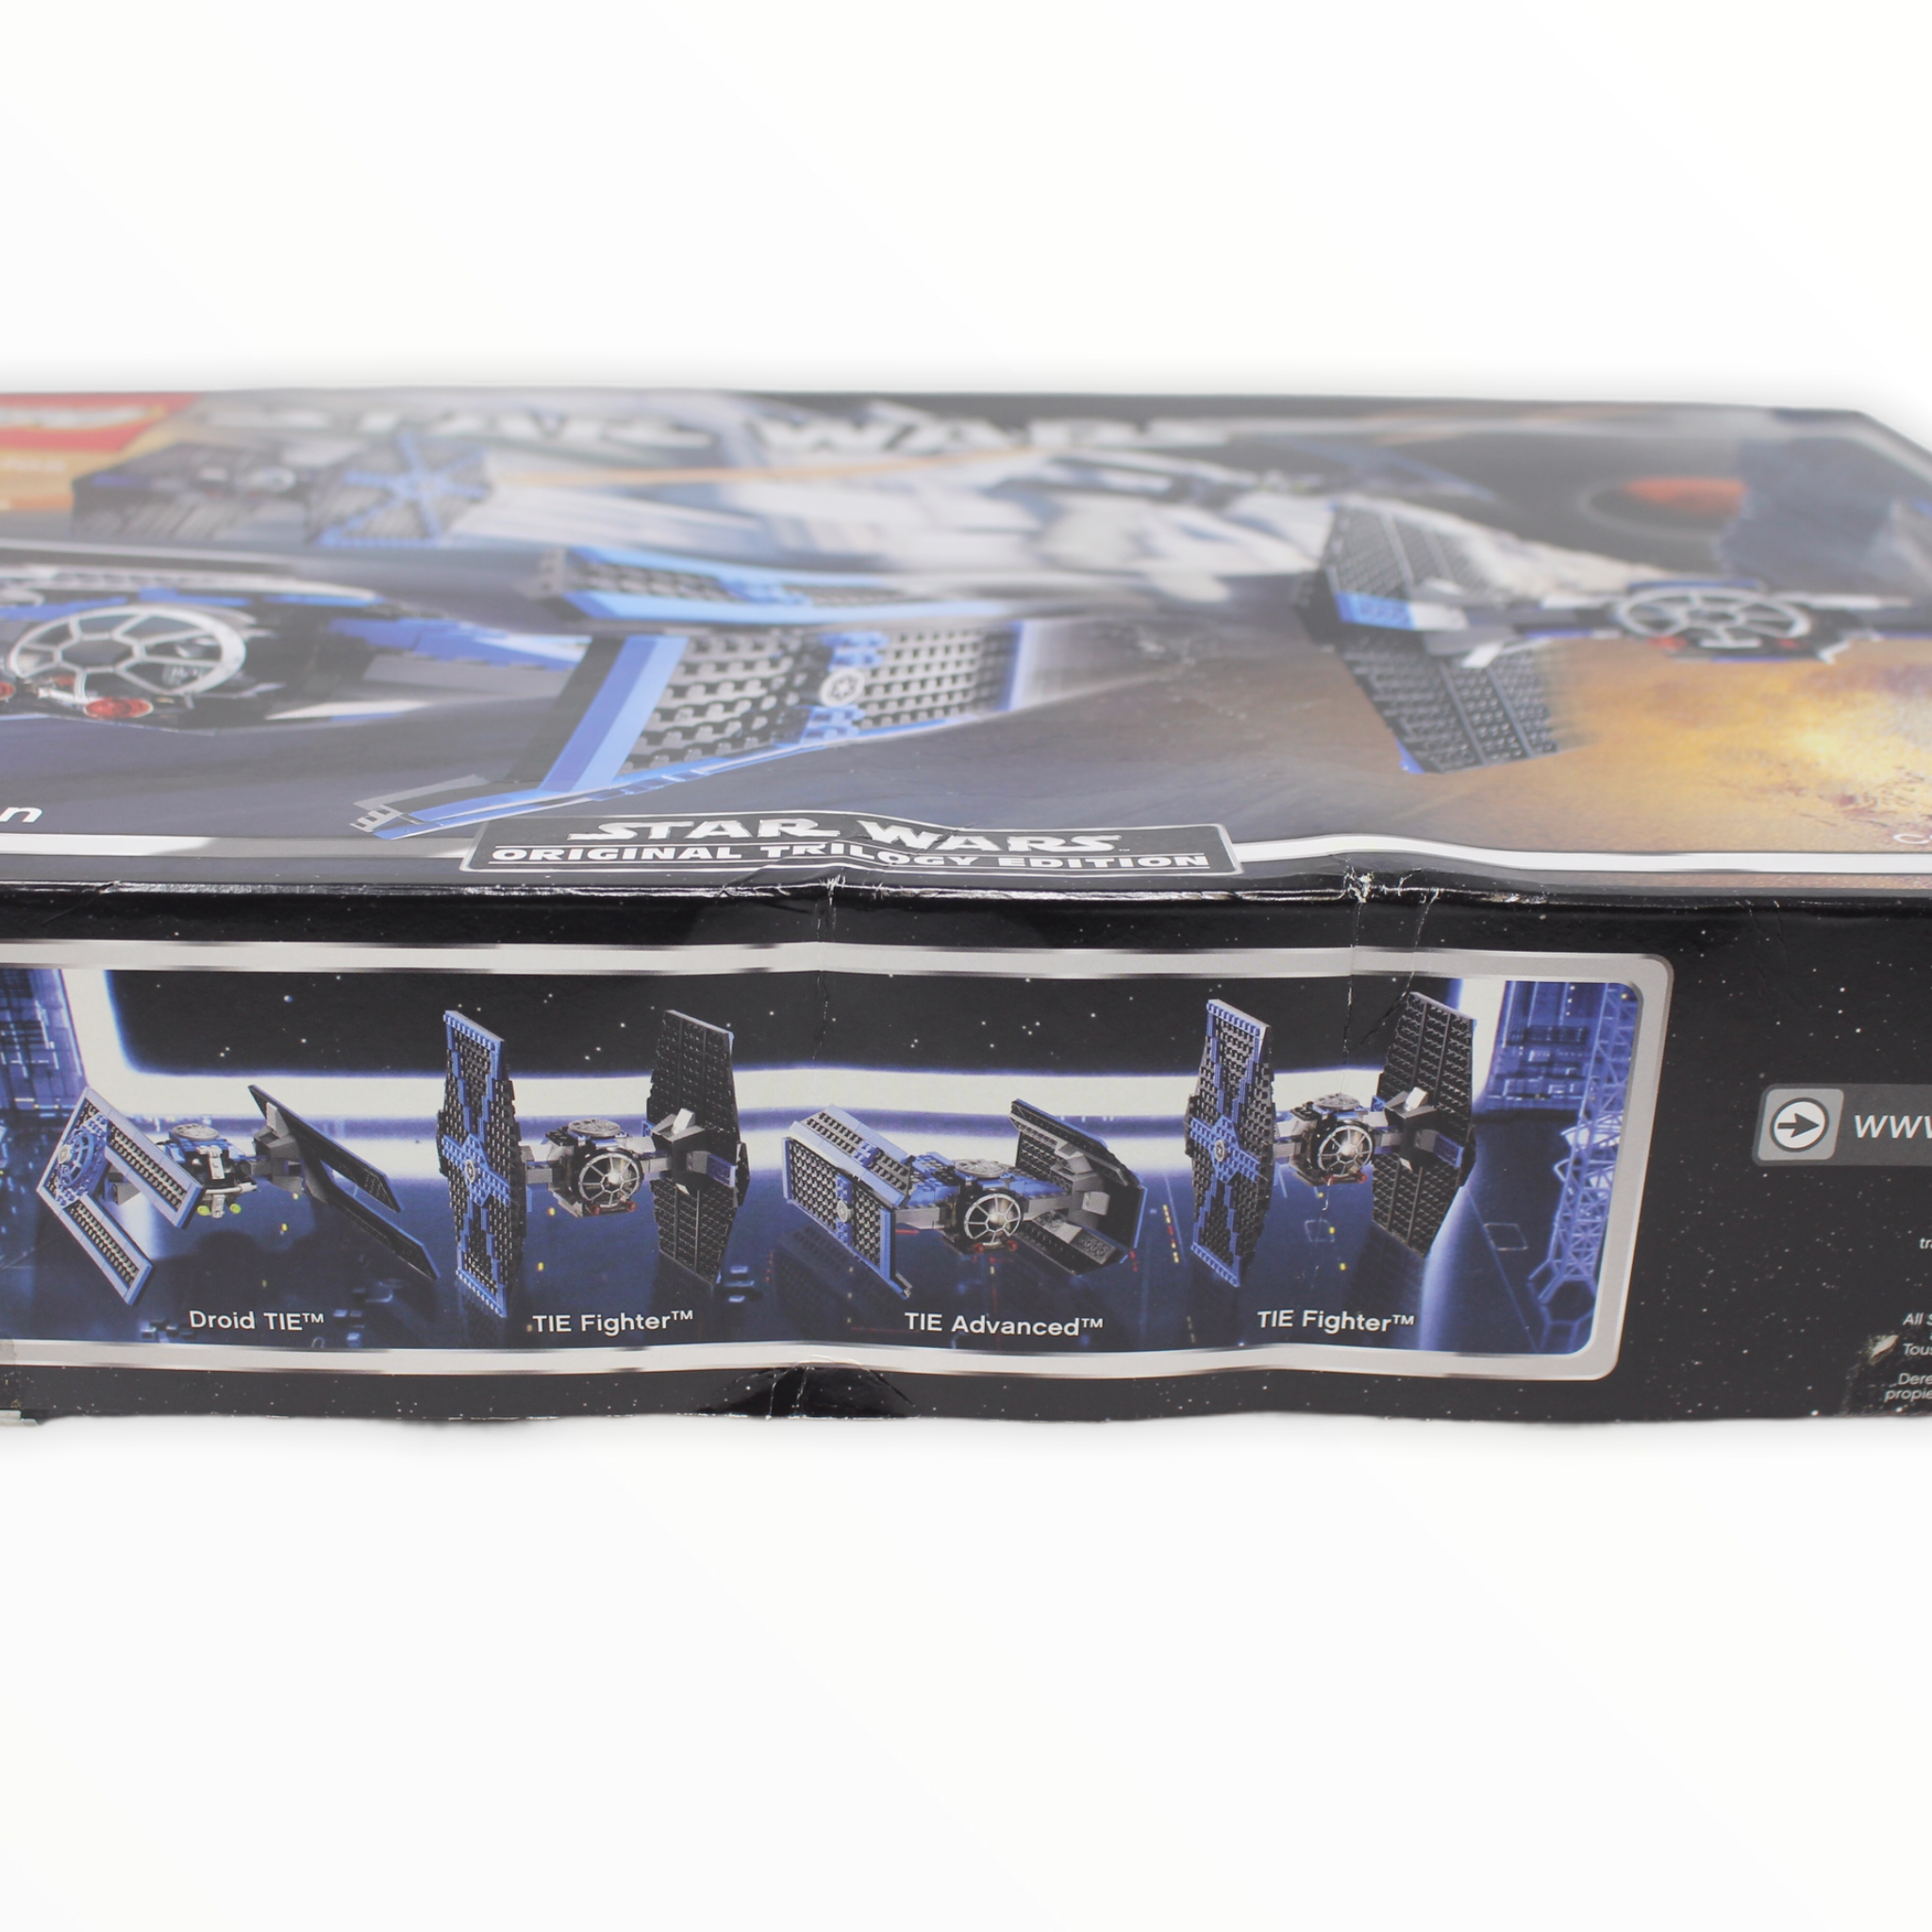 Certified Used Set 10131 Star Wars TIE Fighter Collection